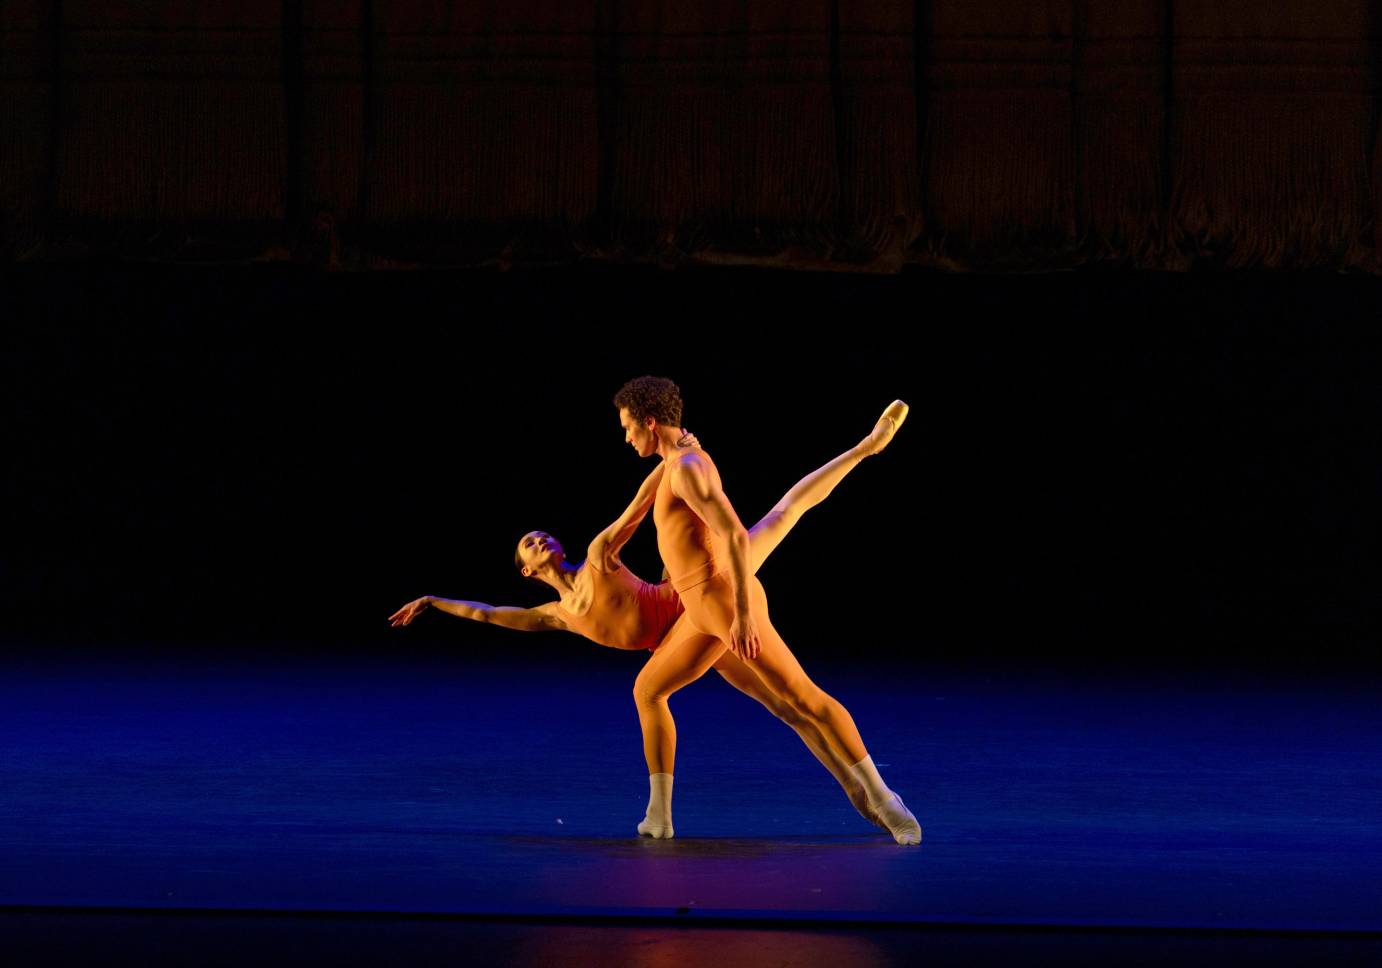 a duet between a male and female partner..both wear bright orange unitards, and the stage floor is colored a striking complementary blue. The man , in a forward lunge, stands above the woman, as she tilts forward on pointe, in an unusual balance, with her grabbing his neck as her body is pitched almost parallel to the floor 